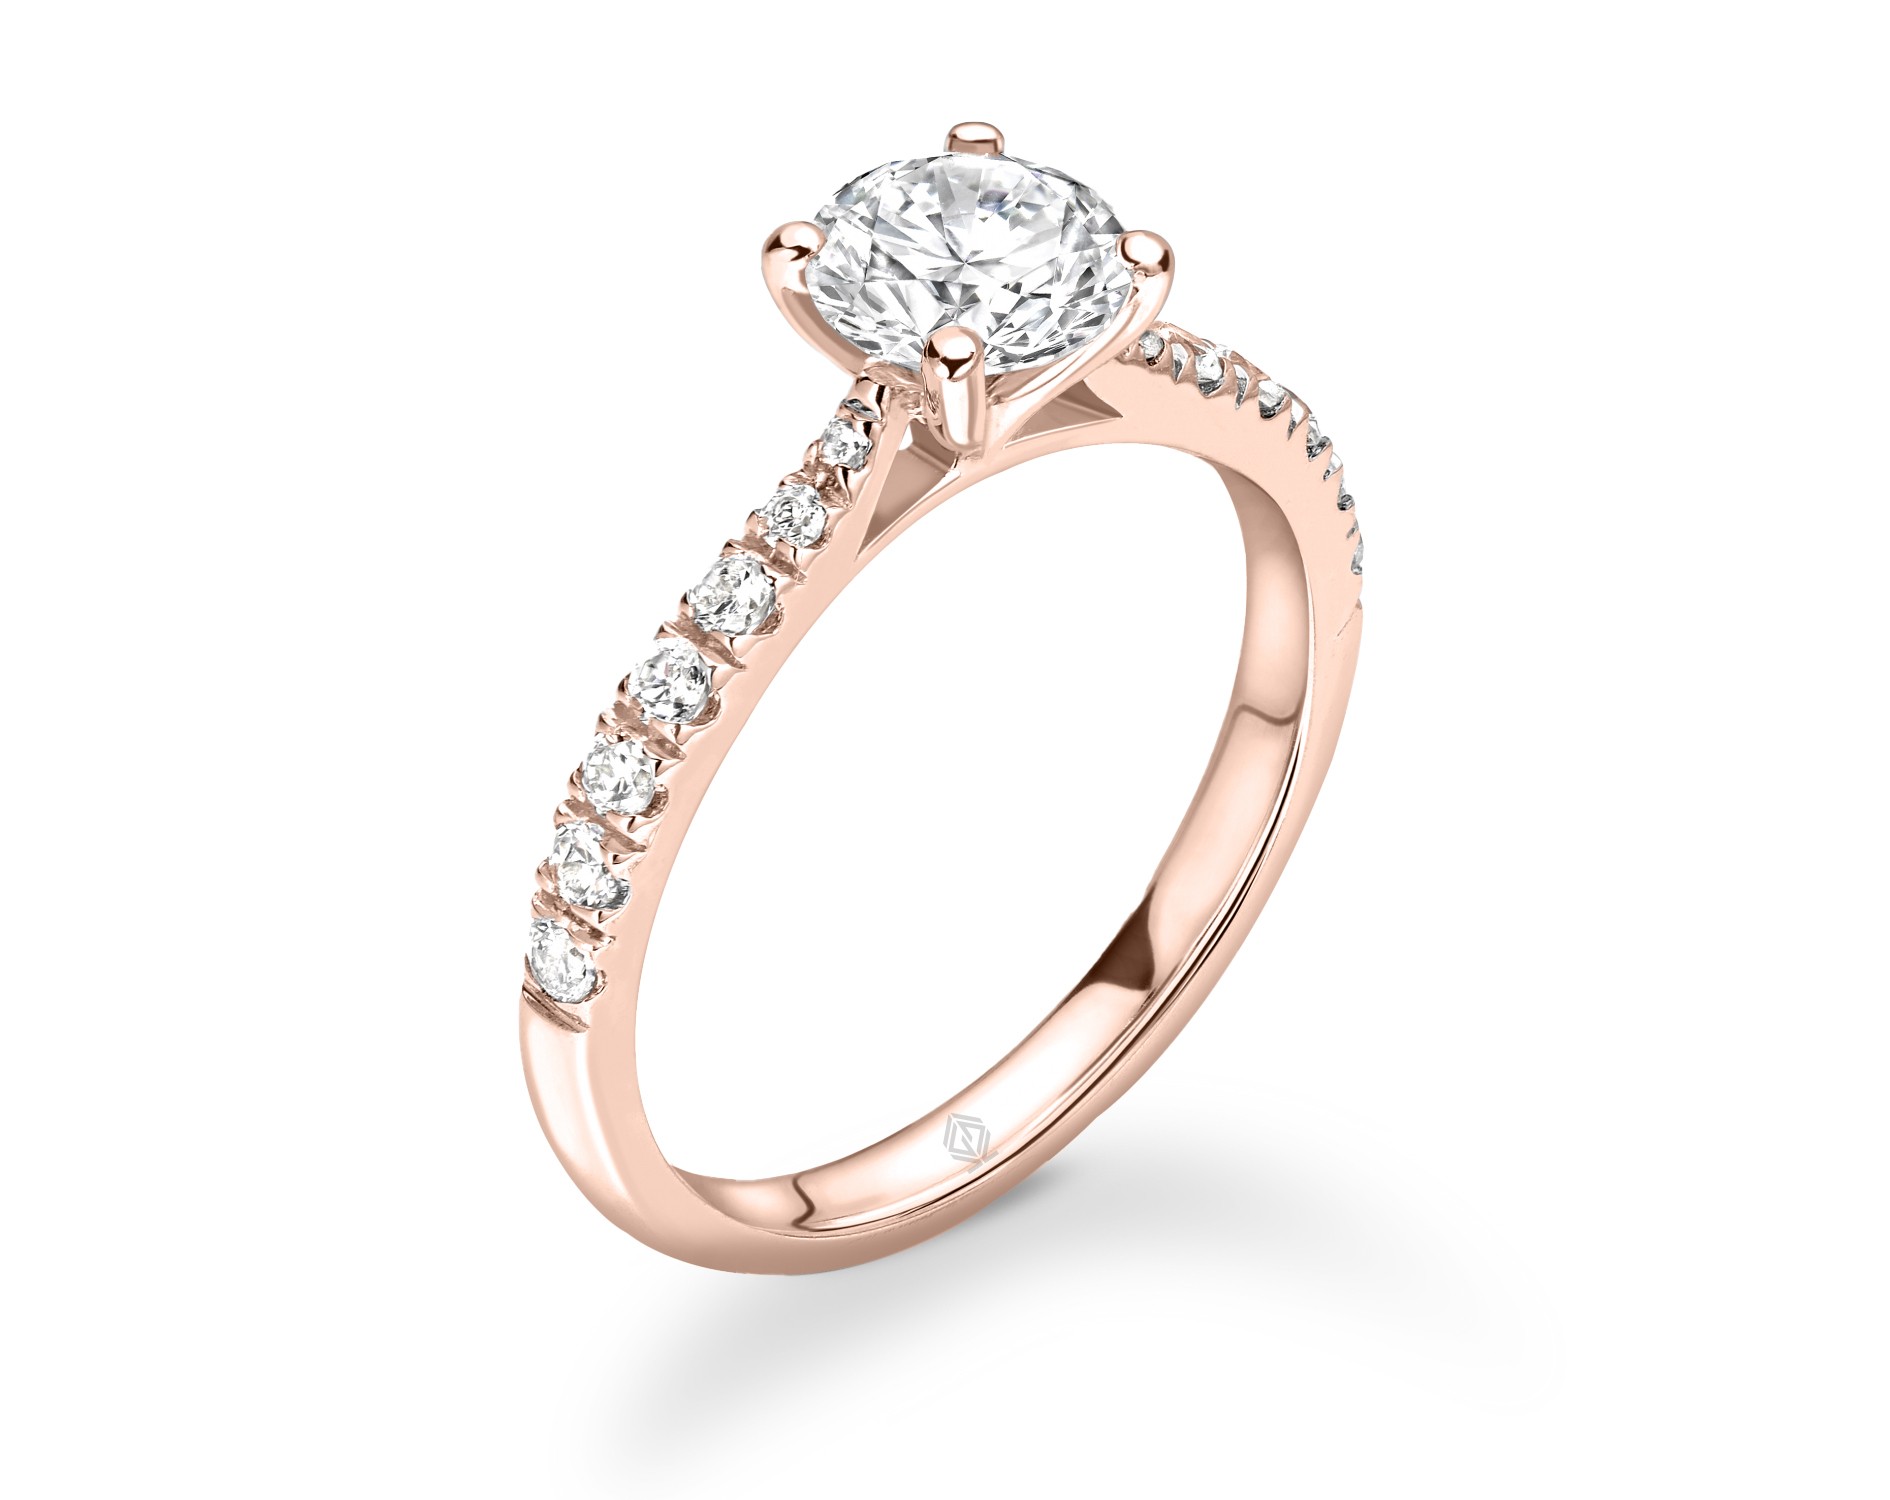 18K ROSE GOLD 4 PRONGS ROUND CUT DIAMOND ENGAGEMENT RING WITH SIDE STONES IN PAVE SET